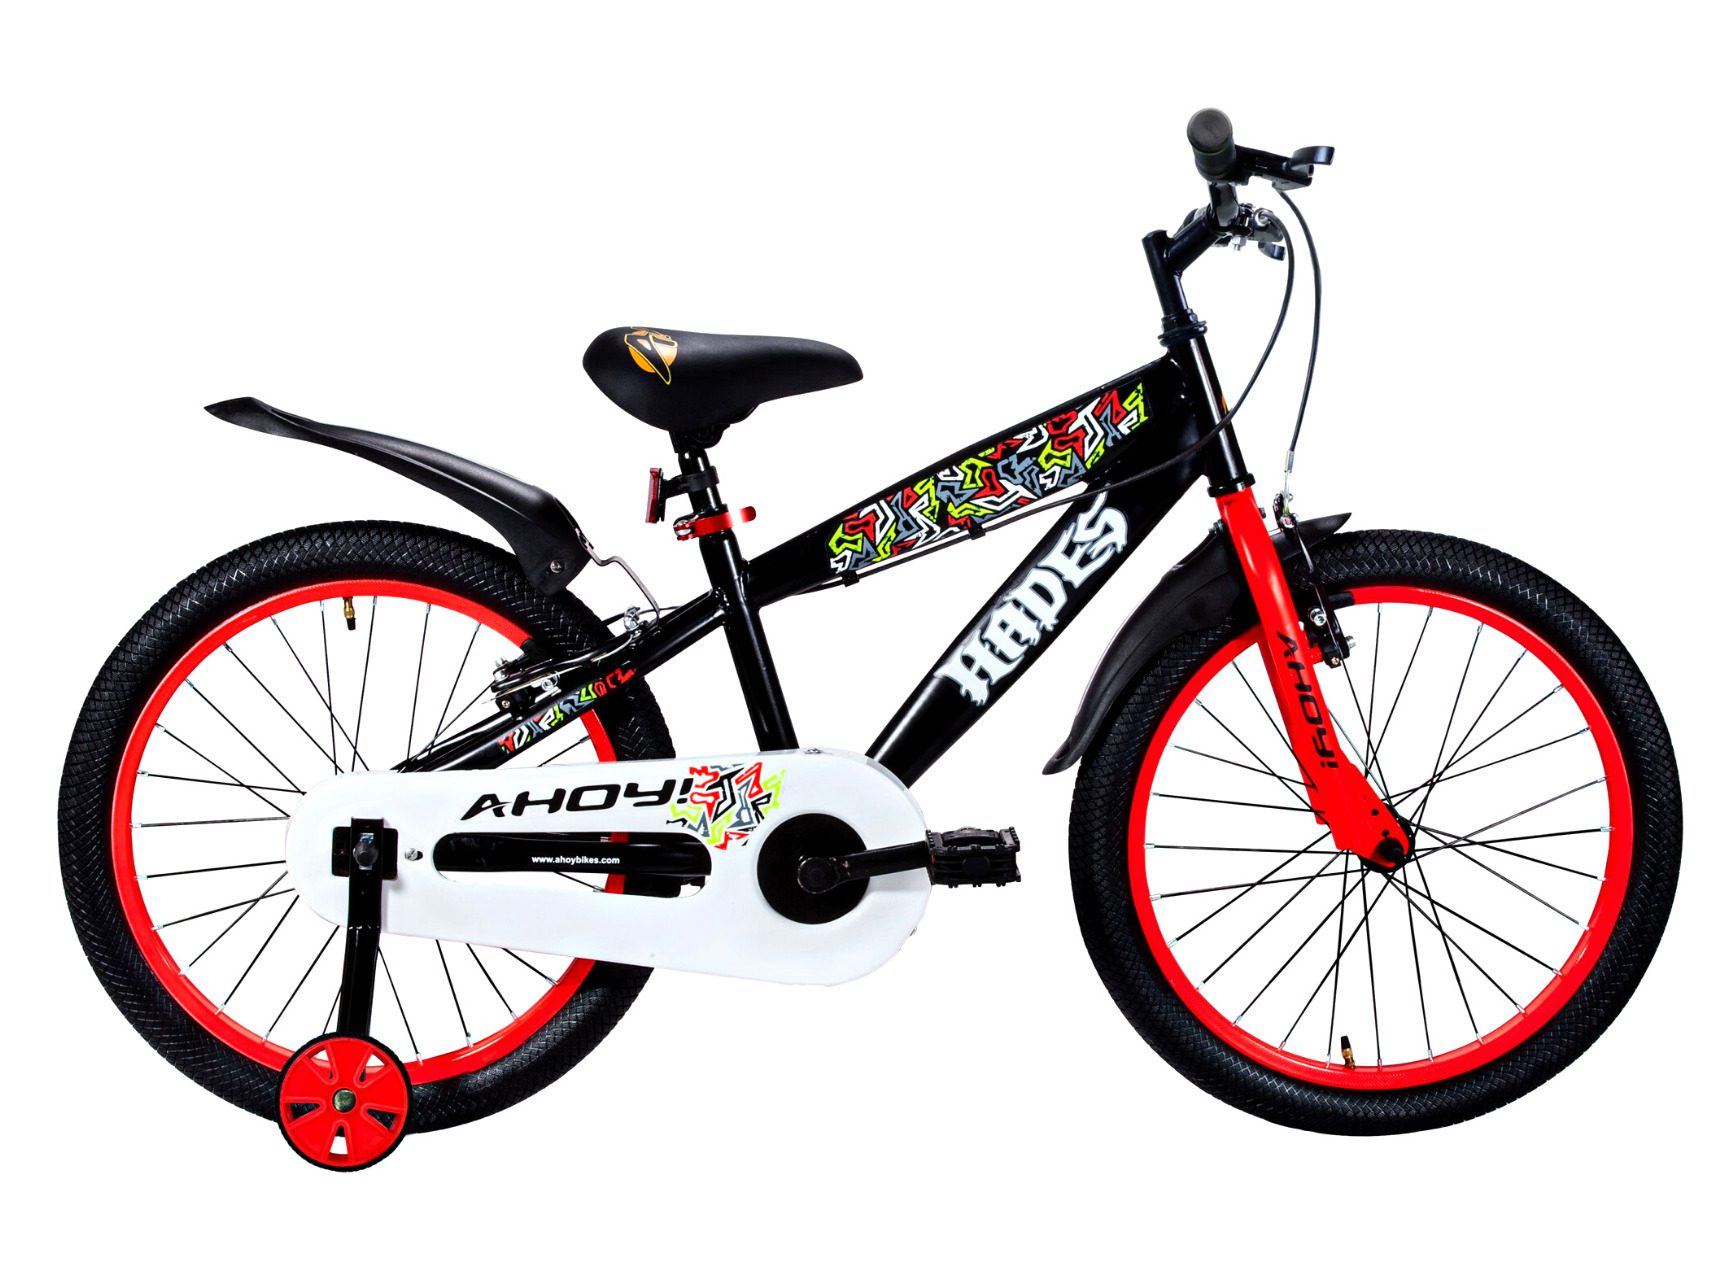 Hades Kids Bike 16T Single Speed | Buy Red Cycle Non Gear for Boys